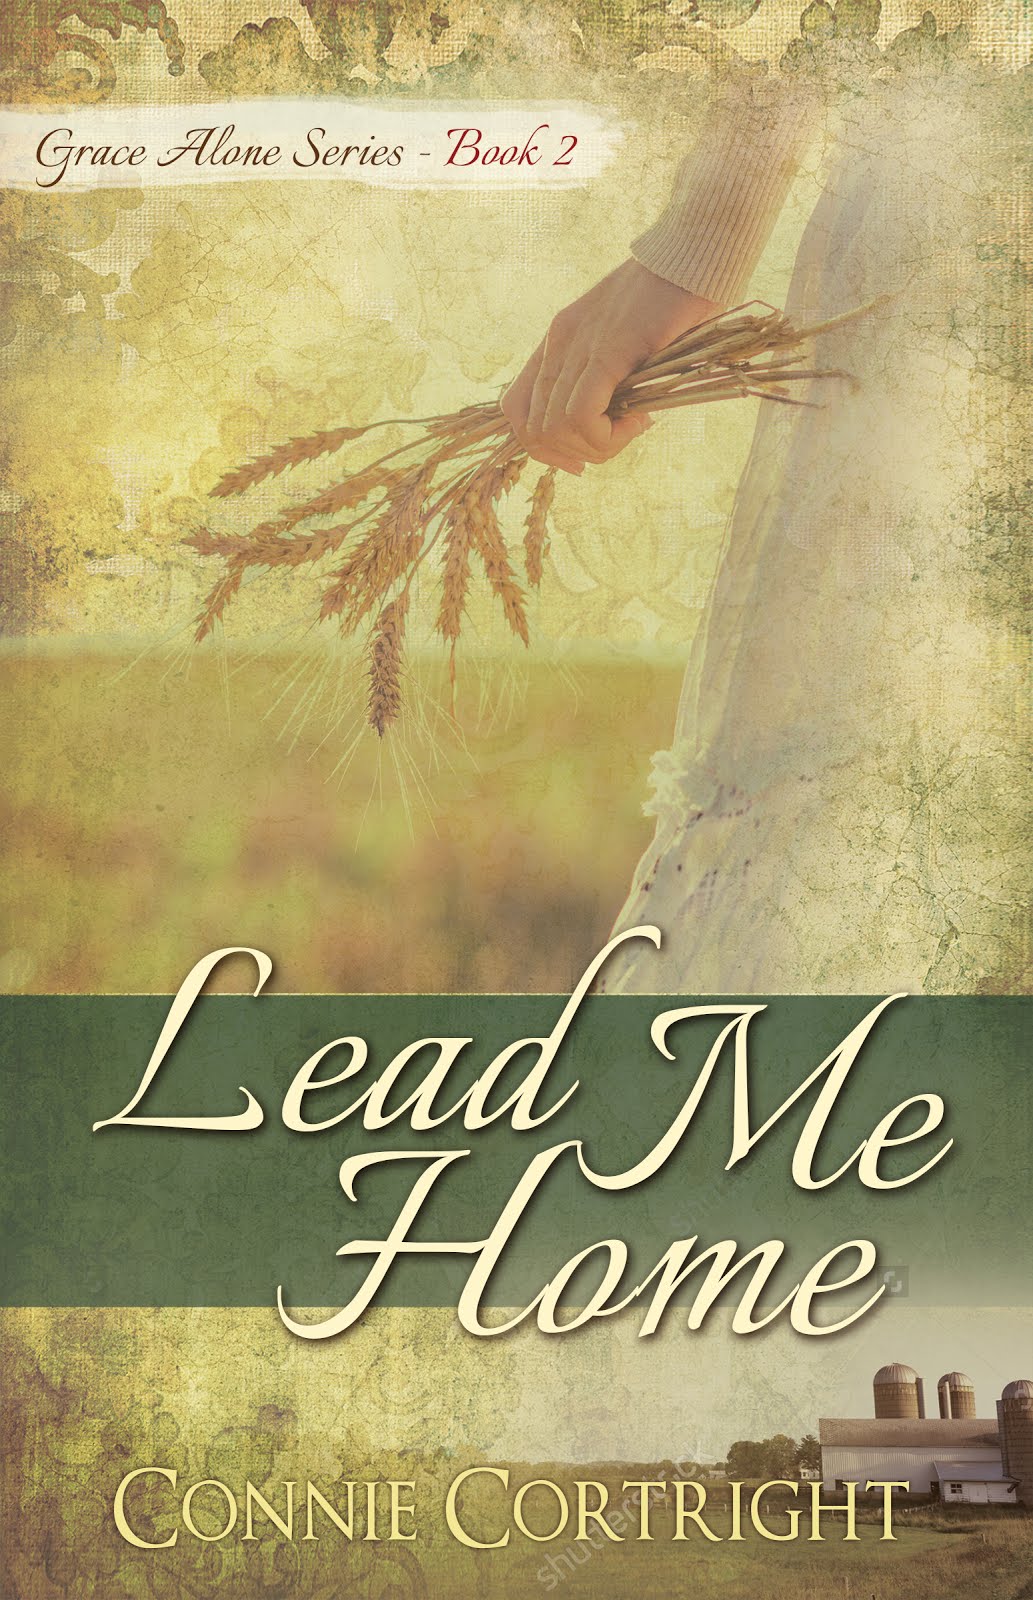 Lead Me Home is available on Amazon.com